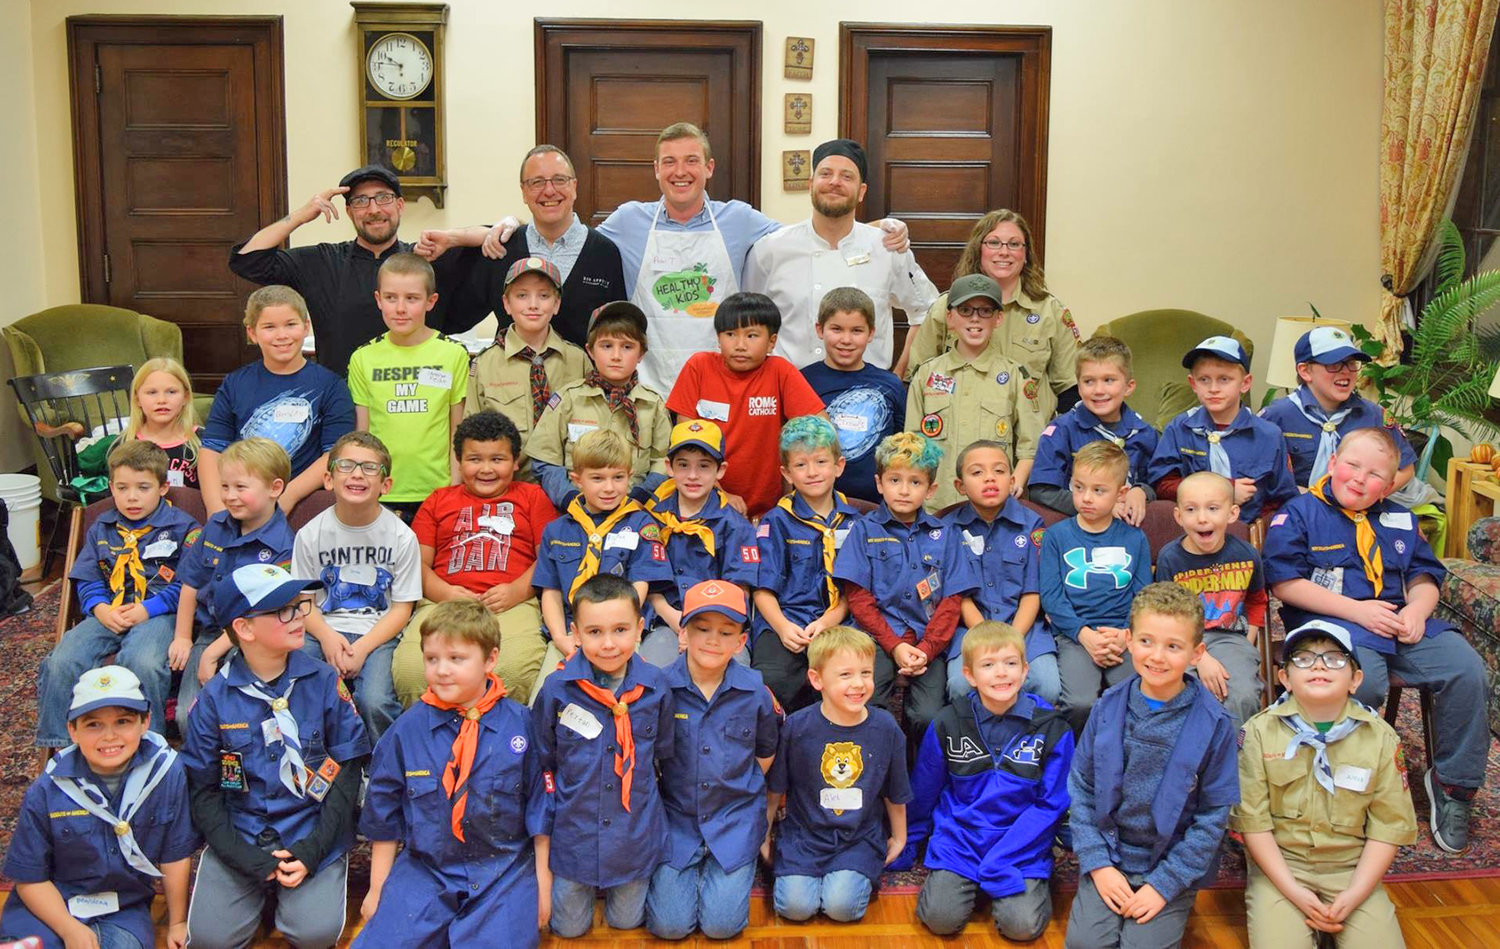 SCOUT EFFORT — Members of the Bon Appetit culinary team from Hamilton College recently came to Rome to visit Boy Scouts Pack 50 to teach them basic culinary skills and how to make healthy food choices.